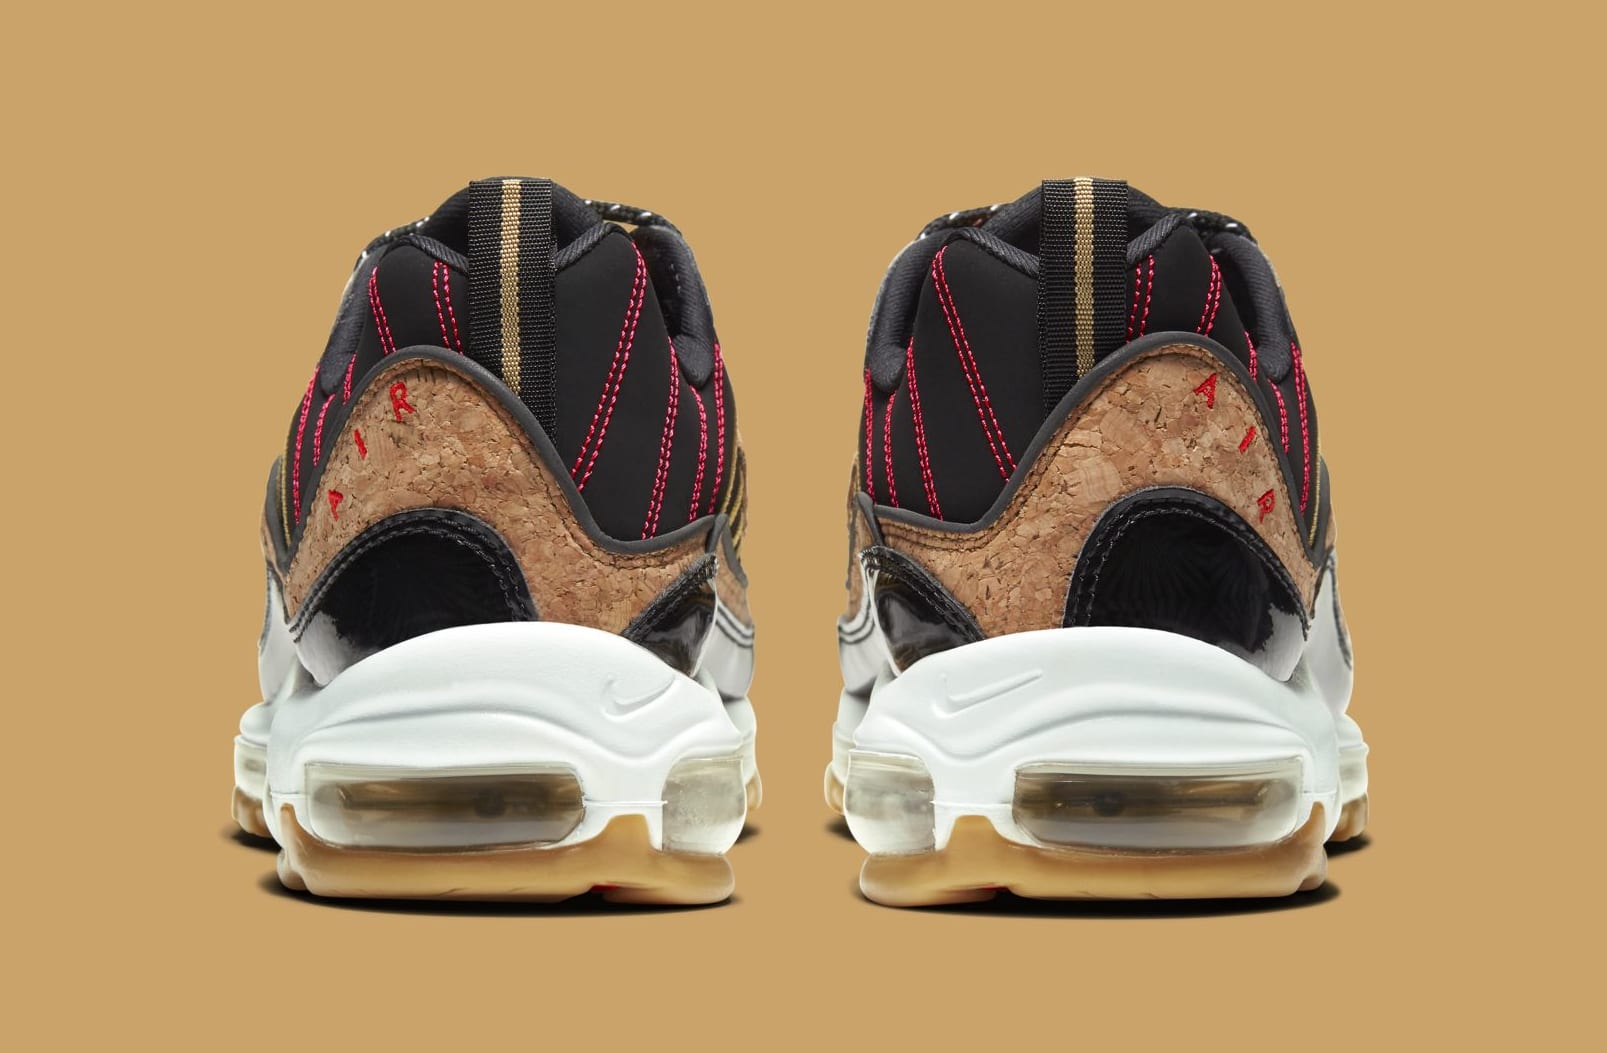 Nike Air Max 98 Coming In Premium &quot;New Year's&quot; Colorway: Official Photos